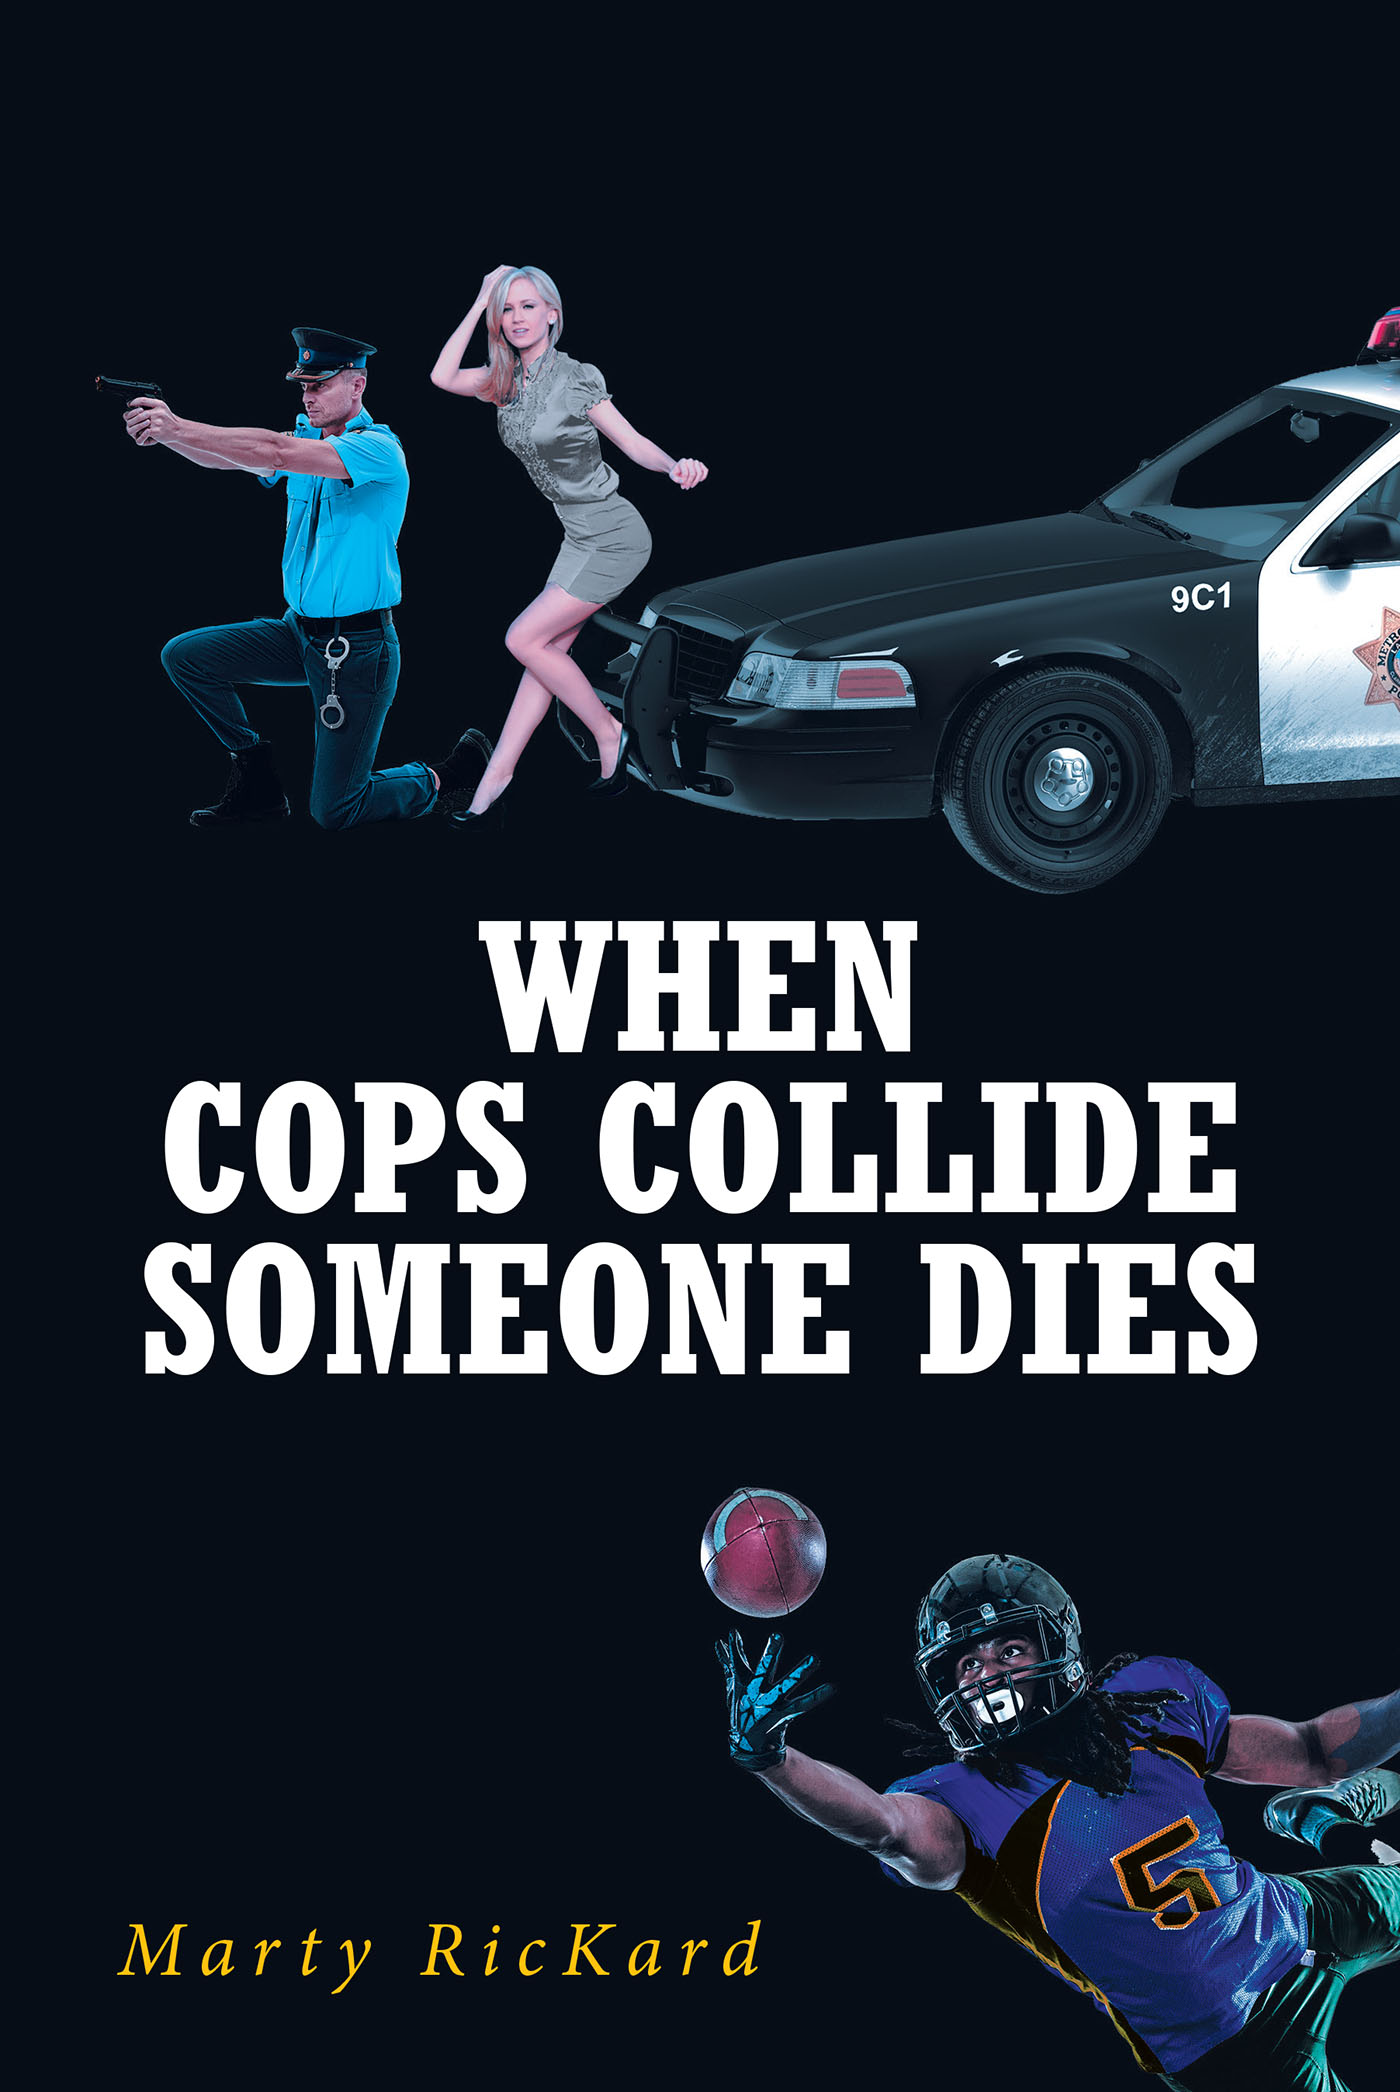 Marty Rickard’s New Book, "When Cops Collide: Someone Dies," Centers Around a Detective Who Discovers His Longtime Partner is Actually a Killer He Must Now Confront